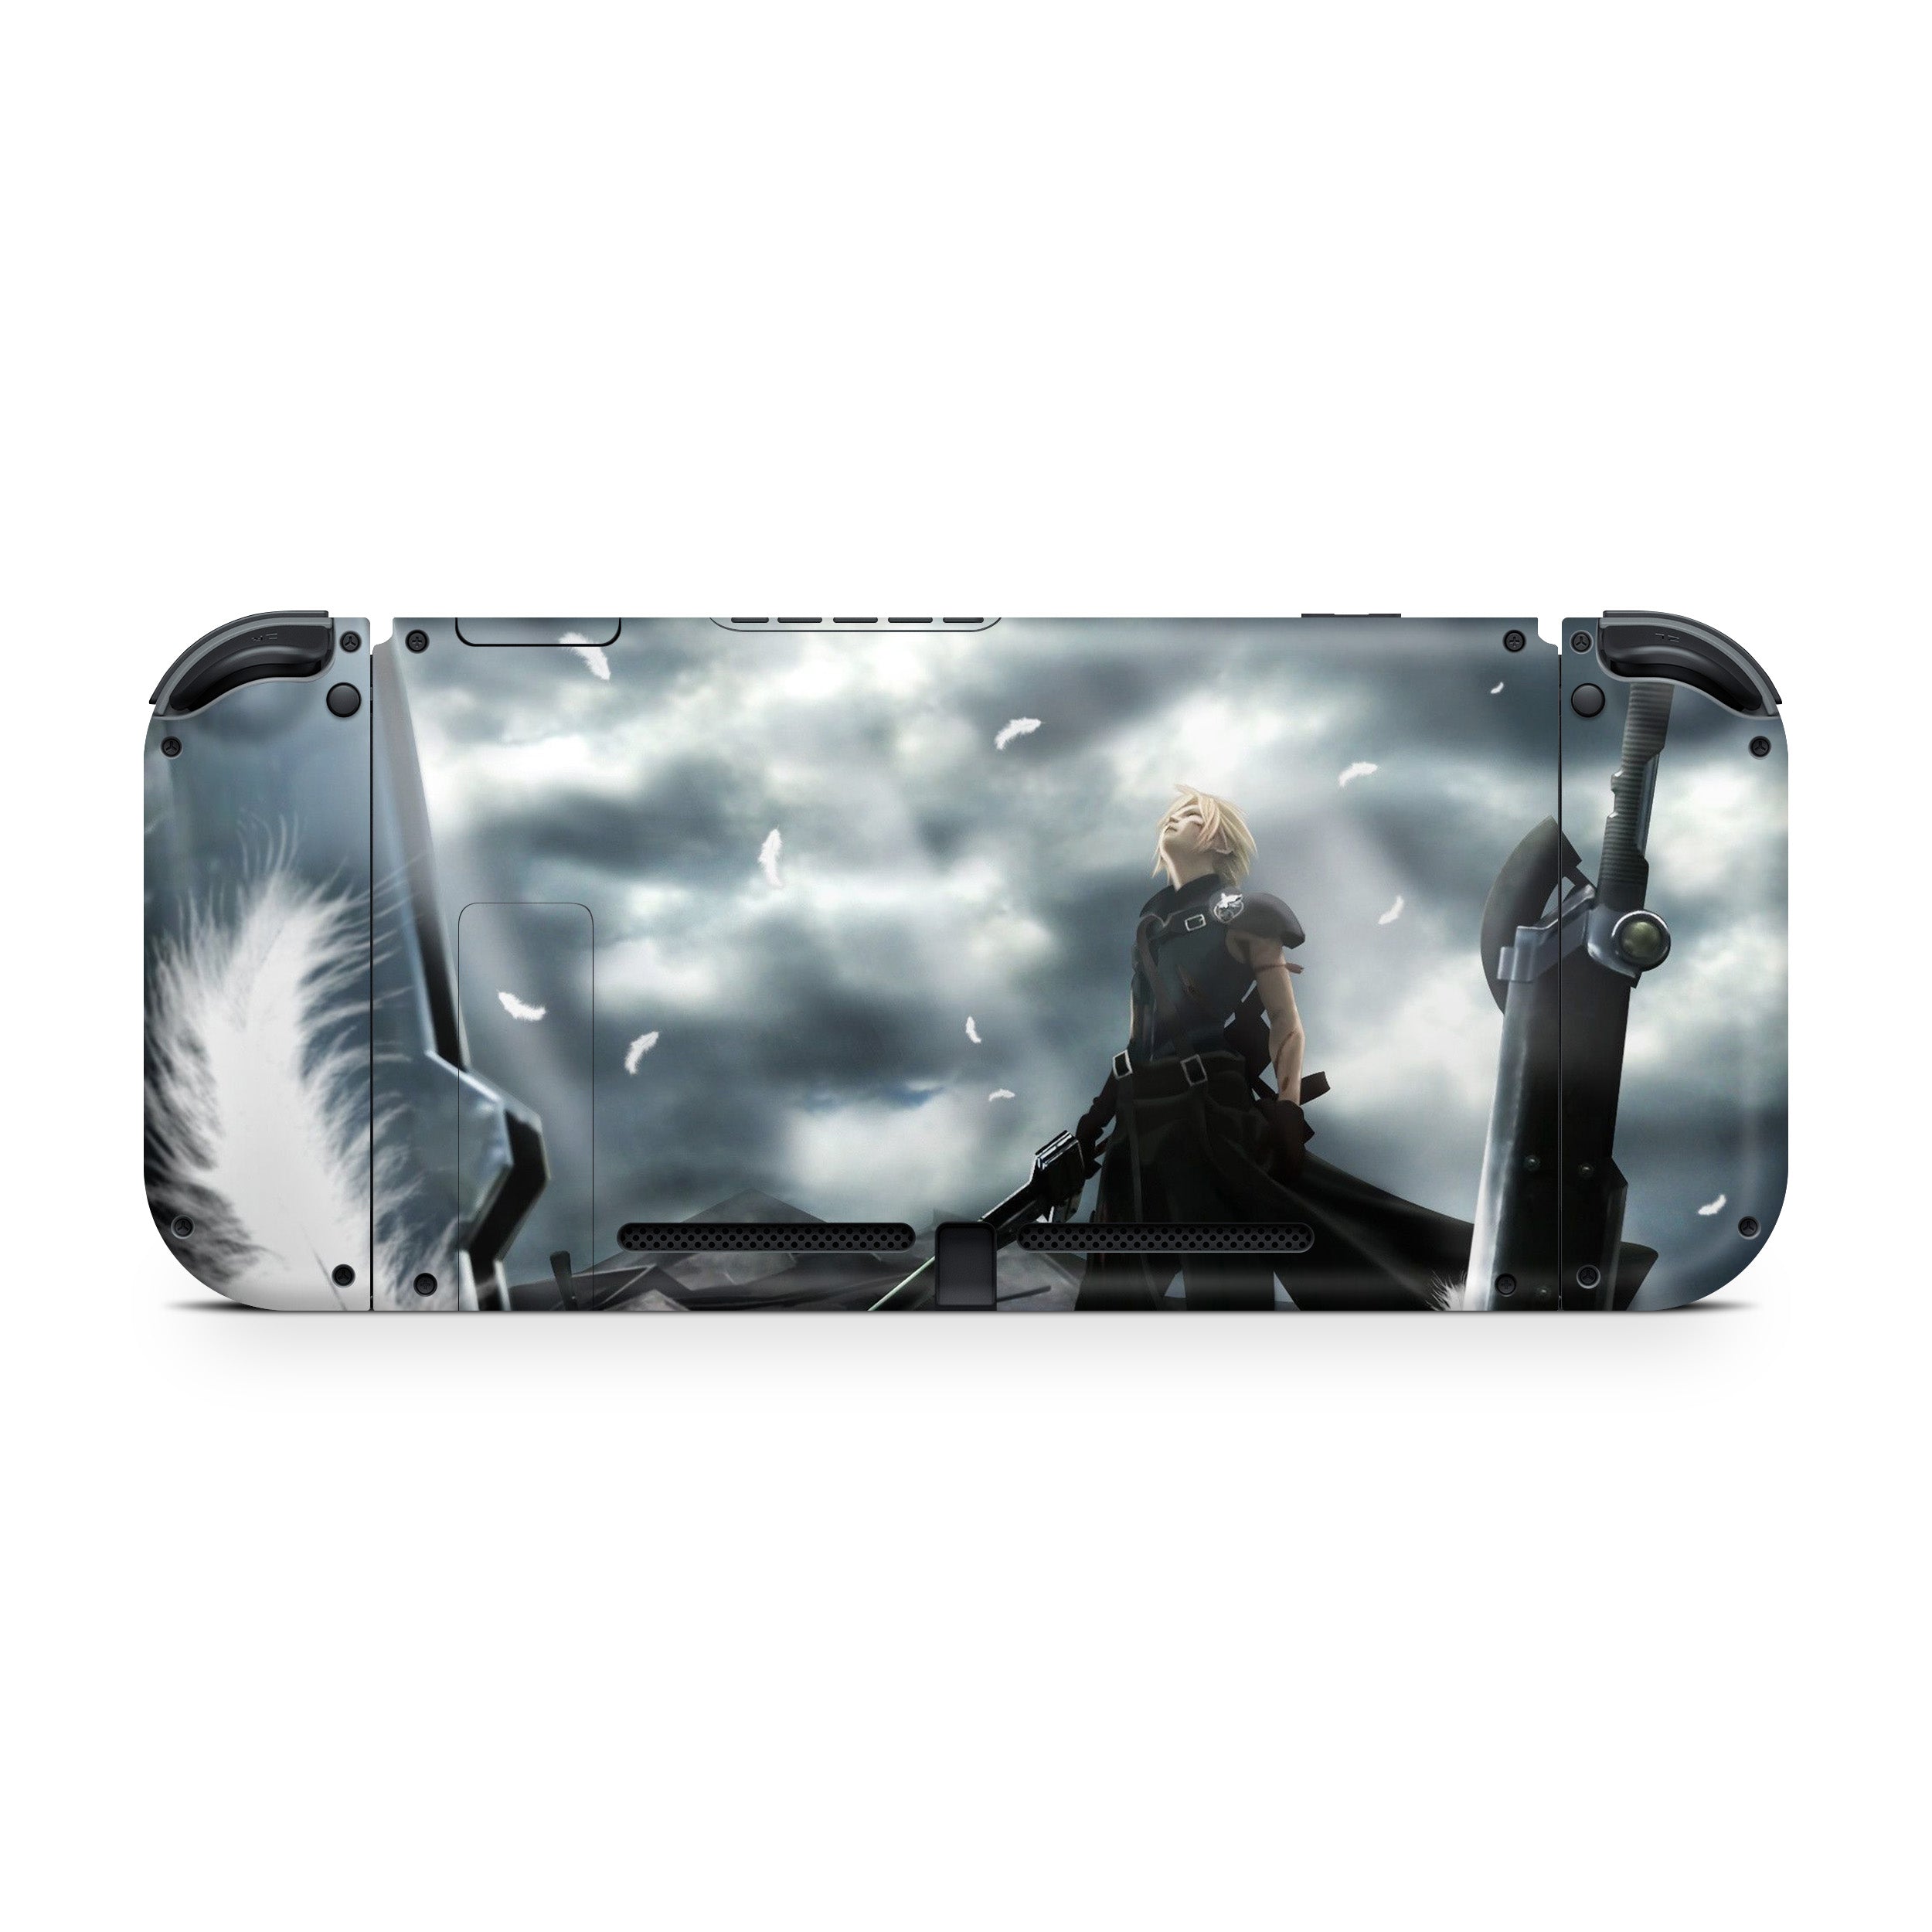 A video game skin featuring a Final Fantasy 7 Cloud Reborn design for the Nintendo Switch.